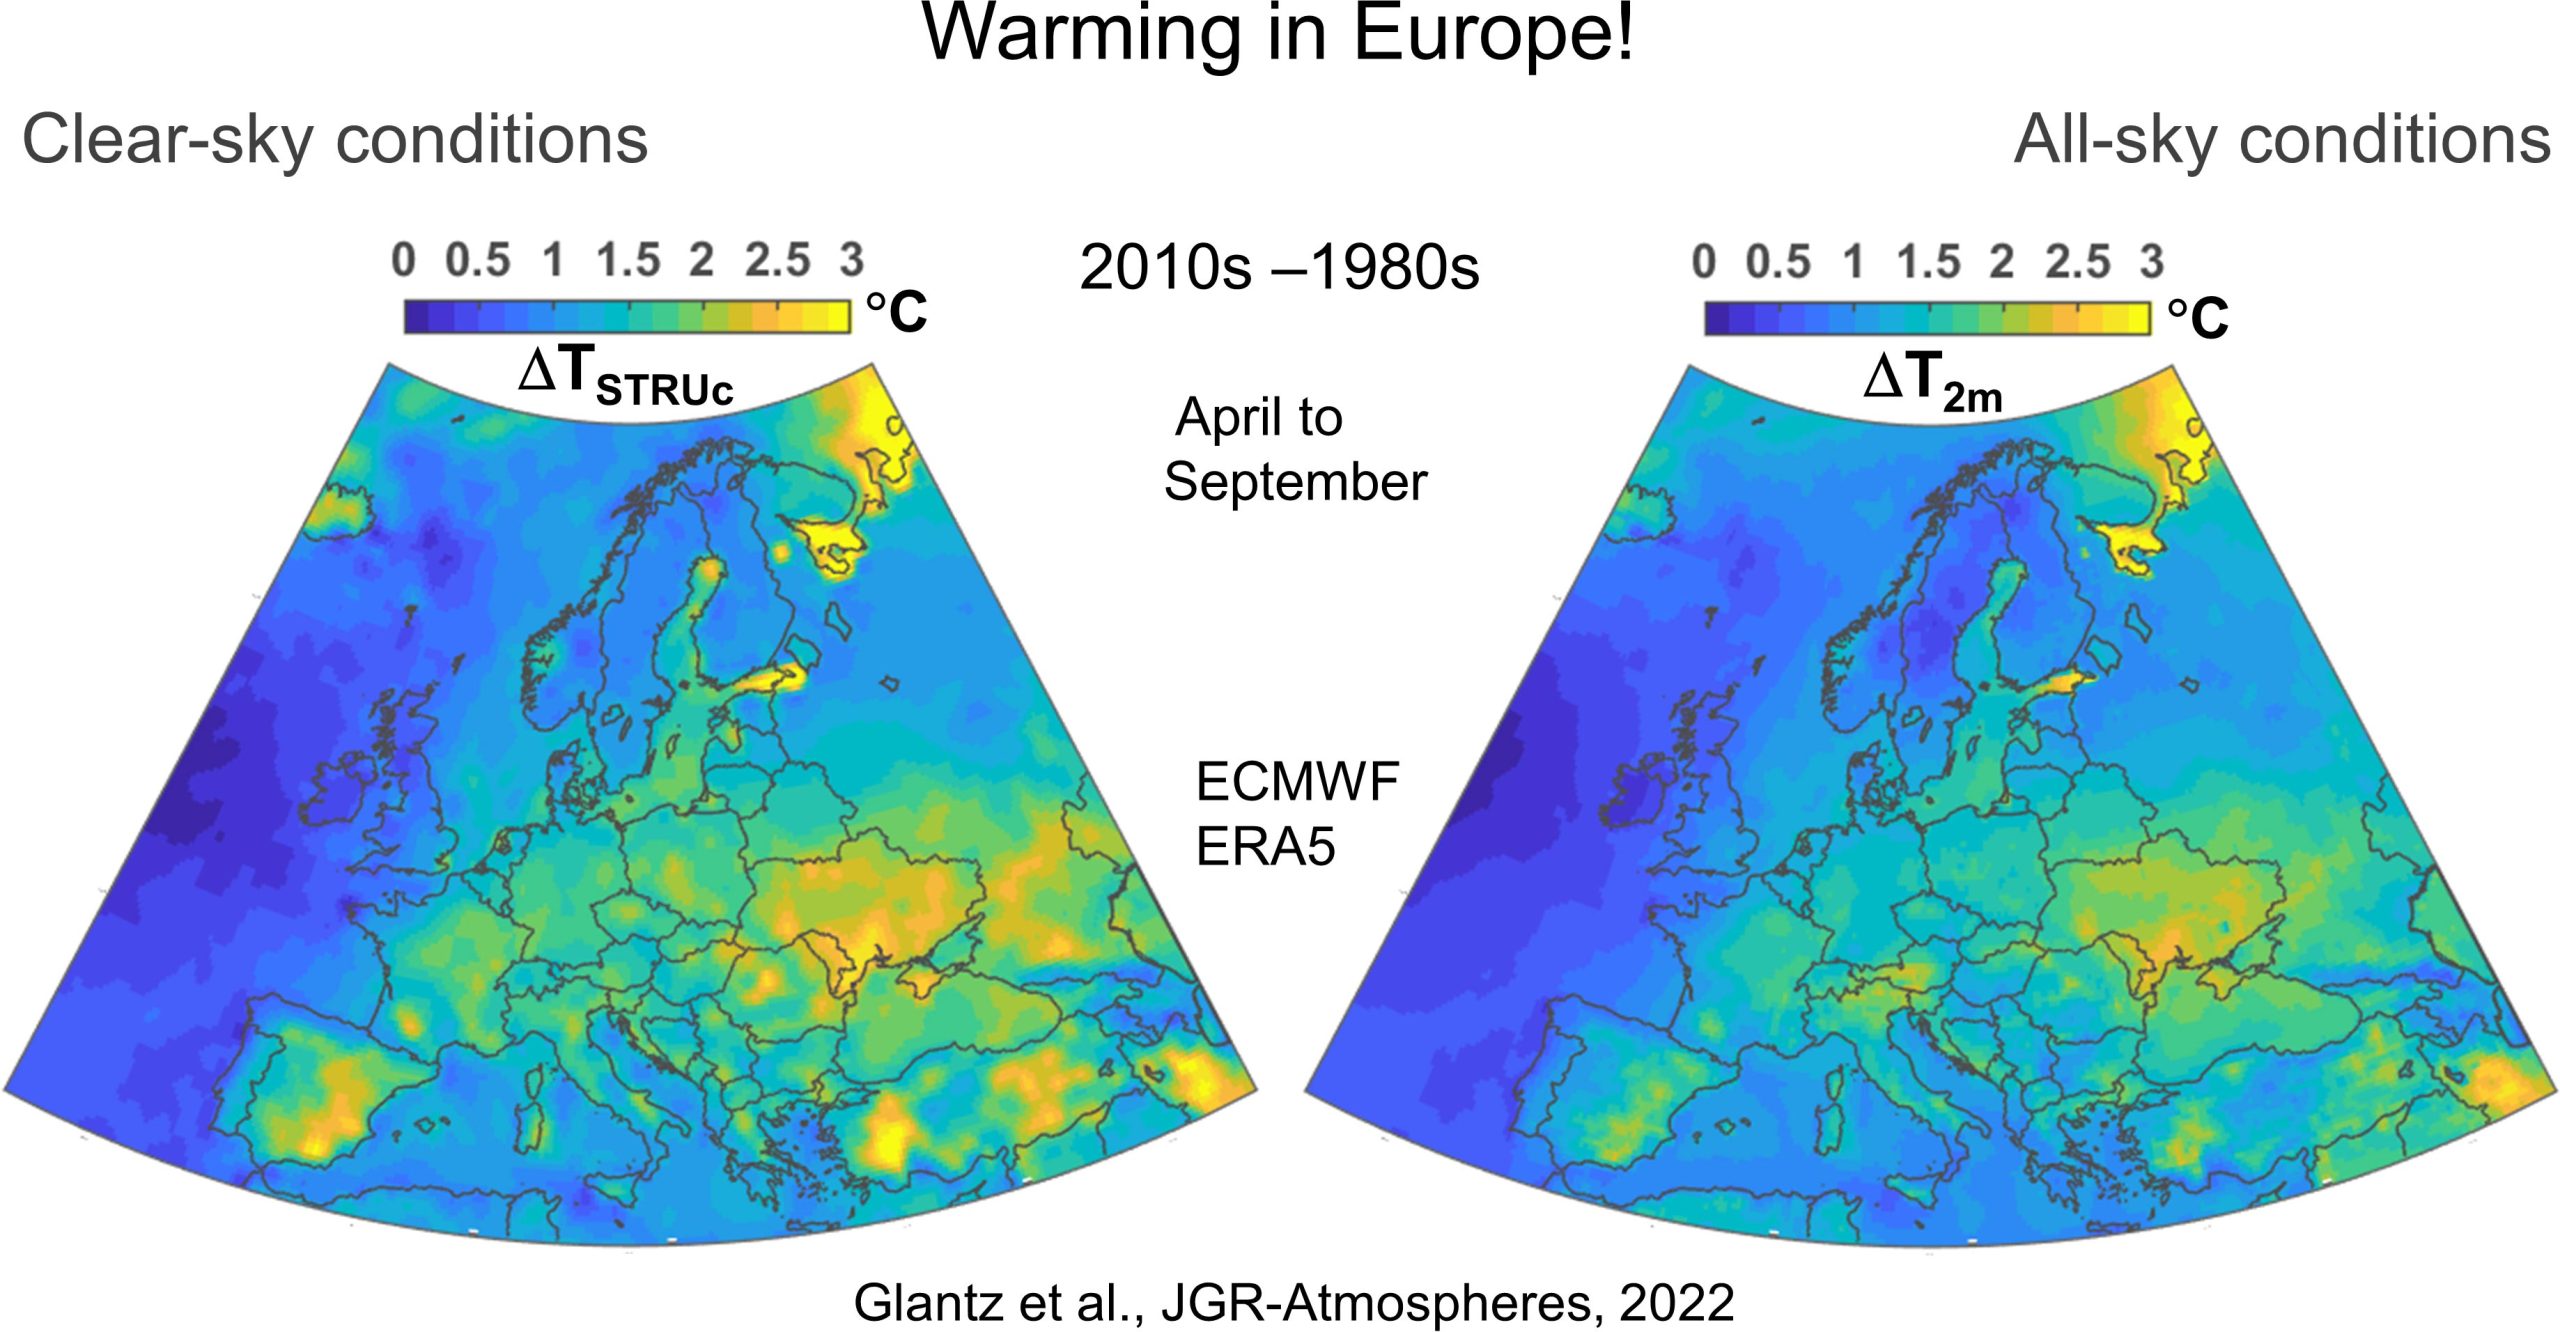 Large Parts of Europe Warming Twice As Fast as the Planet – Already Surpassed 2°C